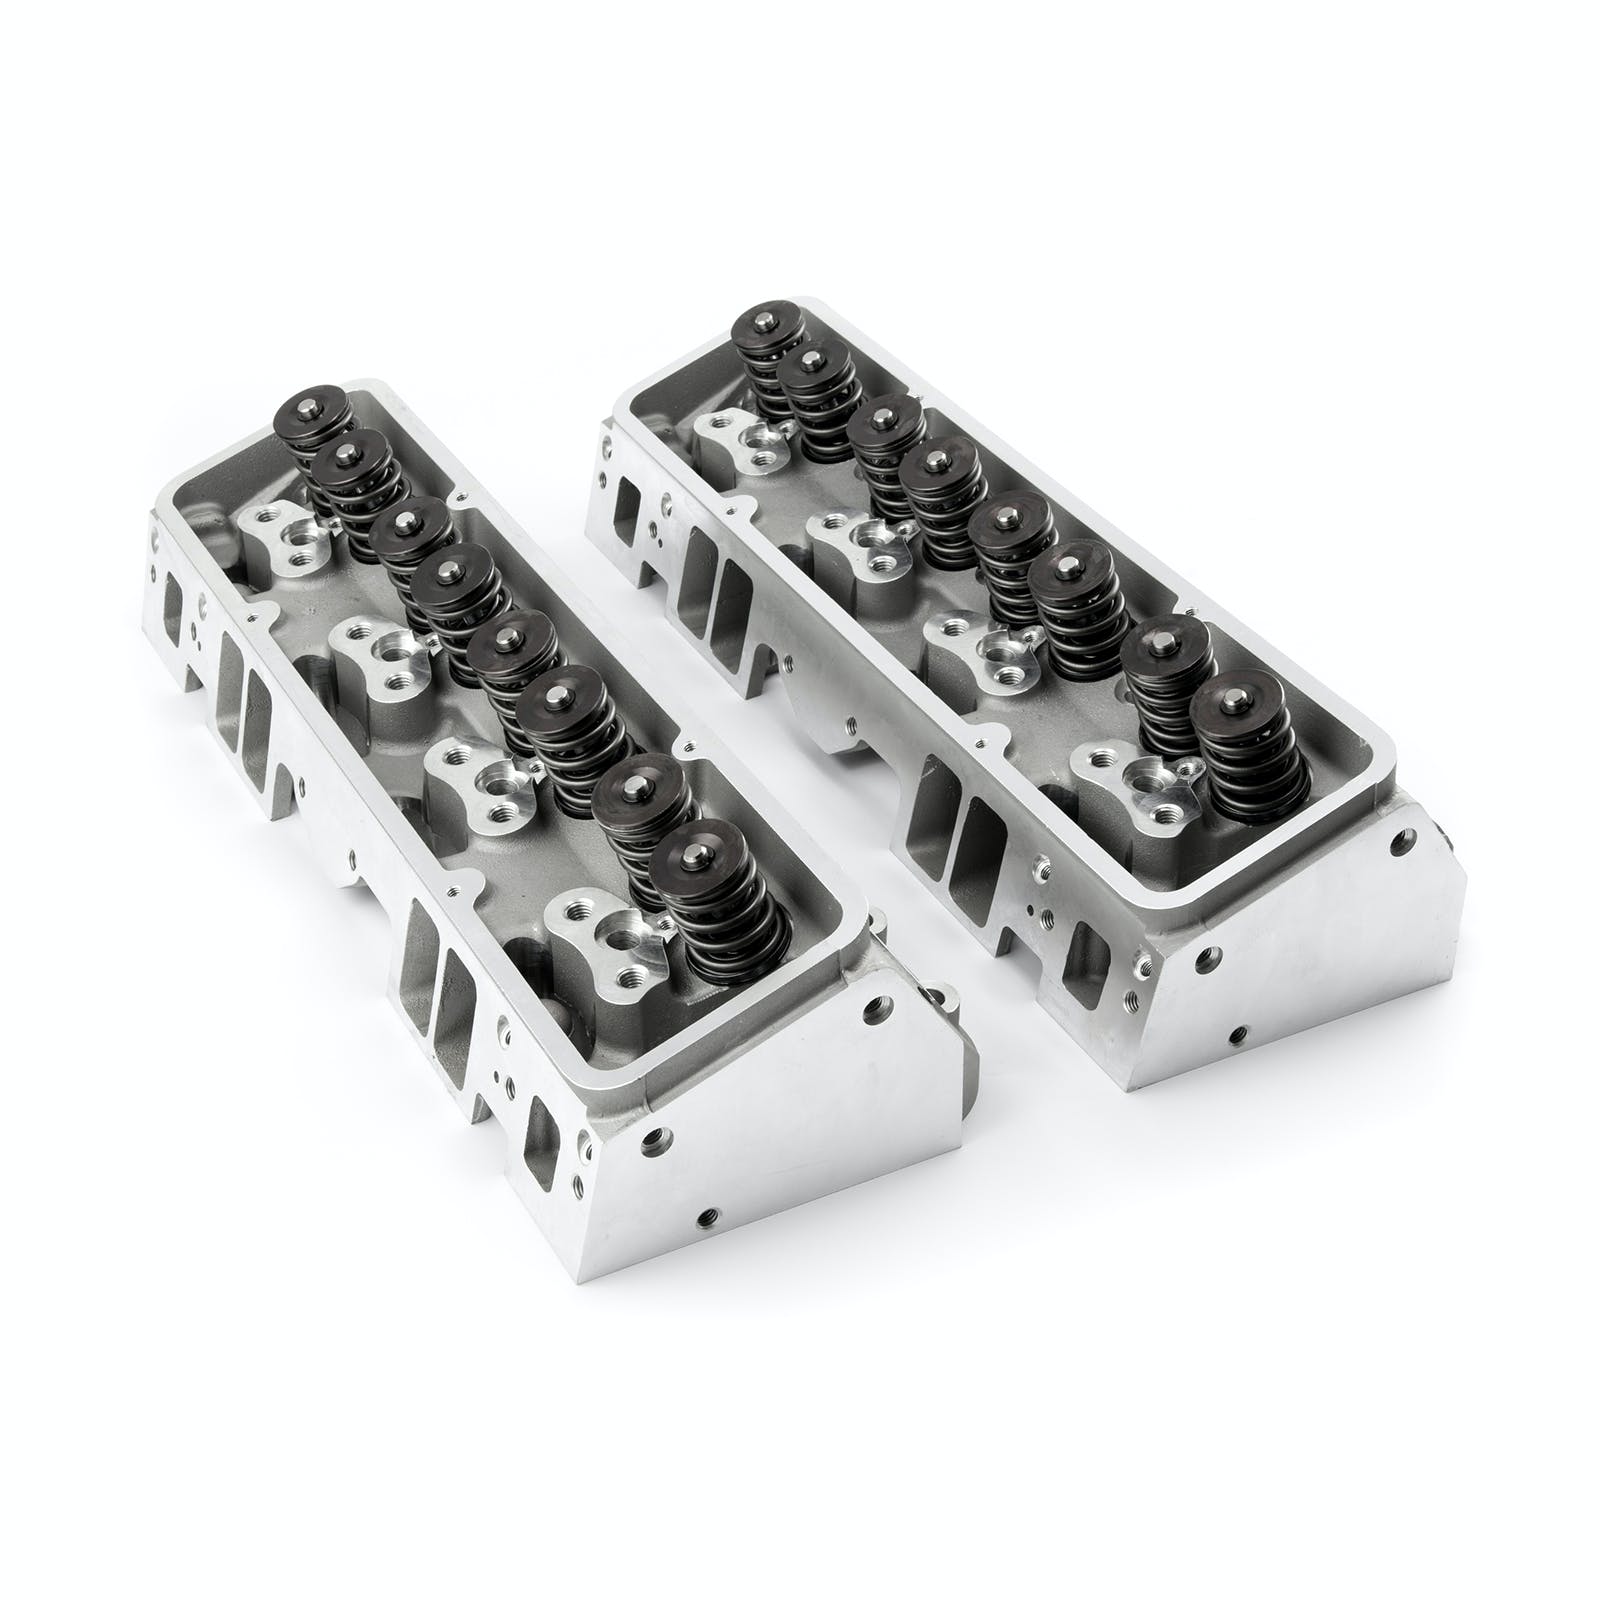 Speedmaster PCE281.2009 205cc 64cc Angle Hydr-R Complete Aluminum Cylinder Heads